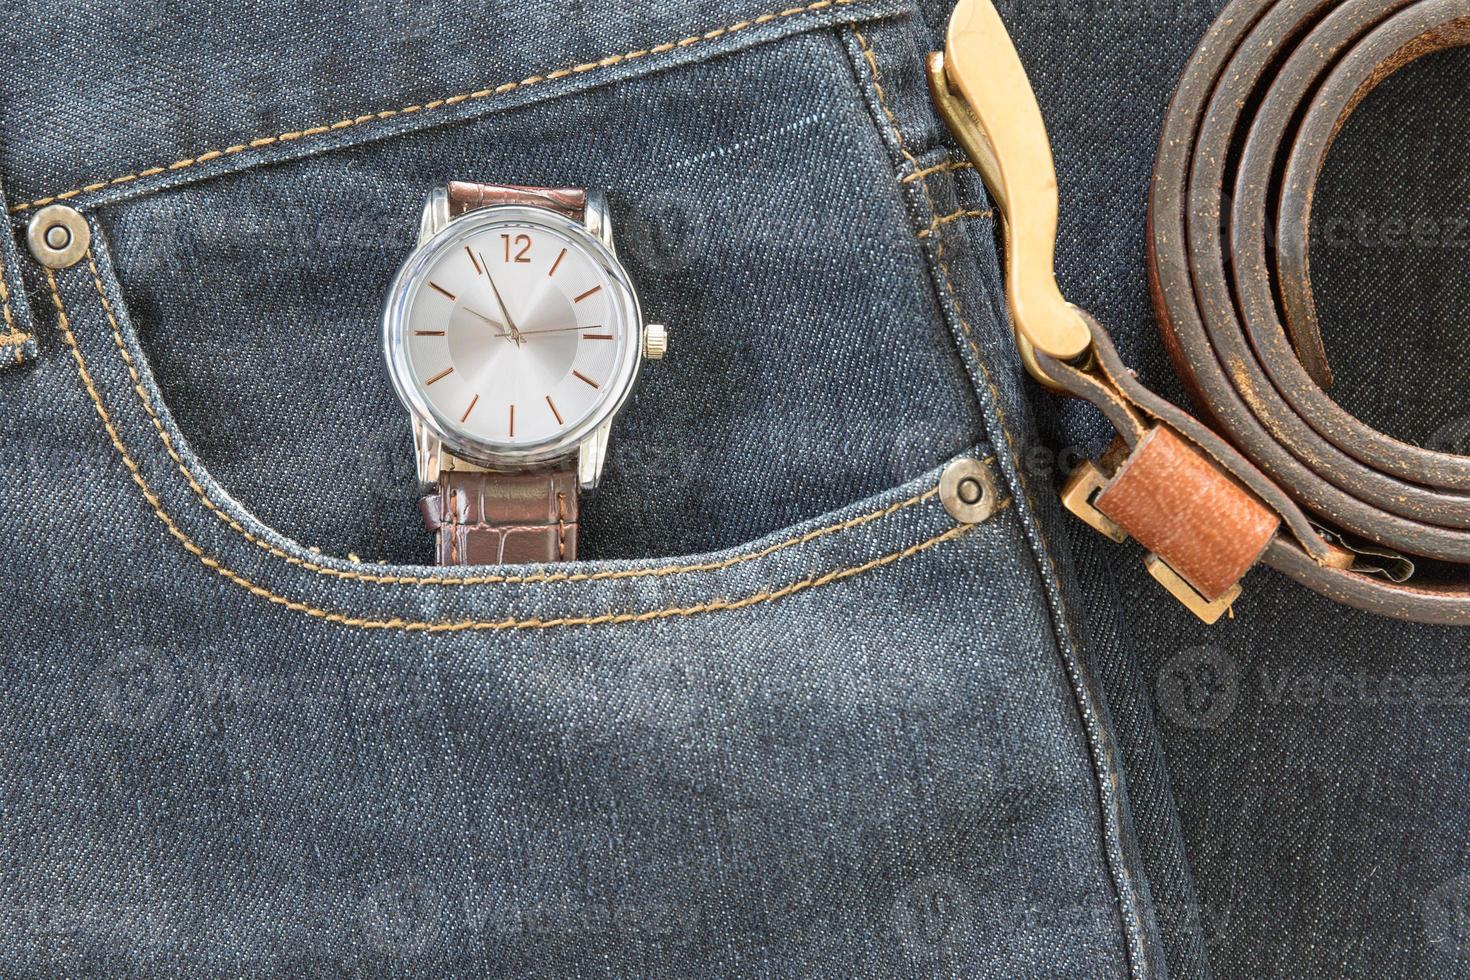 Wrist watch and leather belt on jeans photo